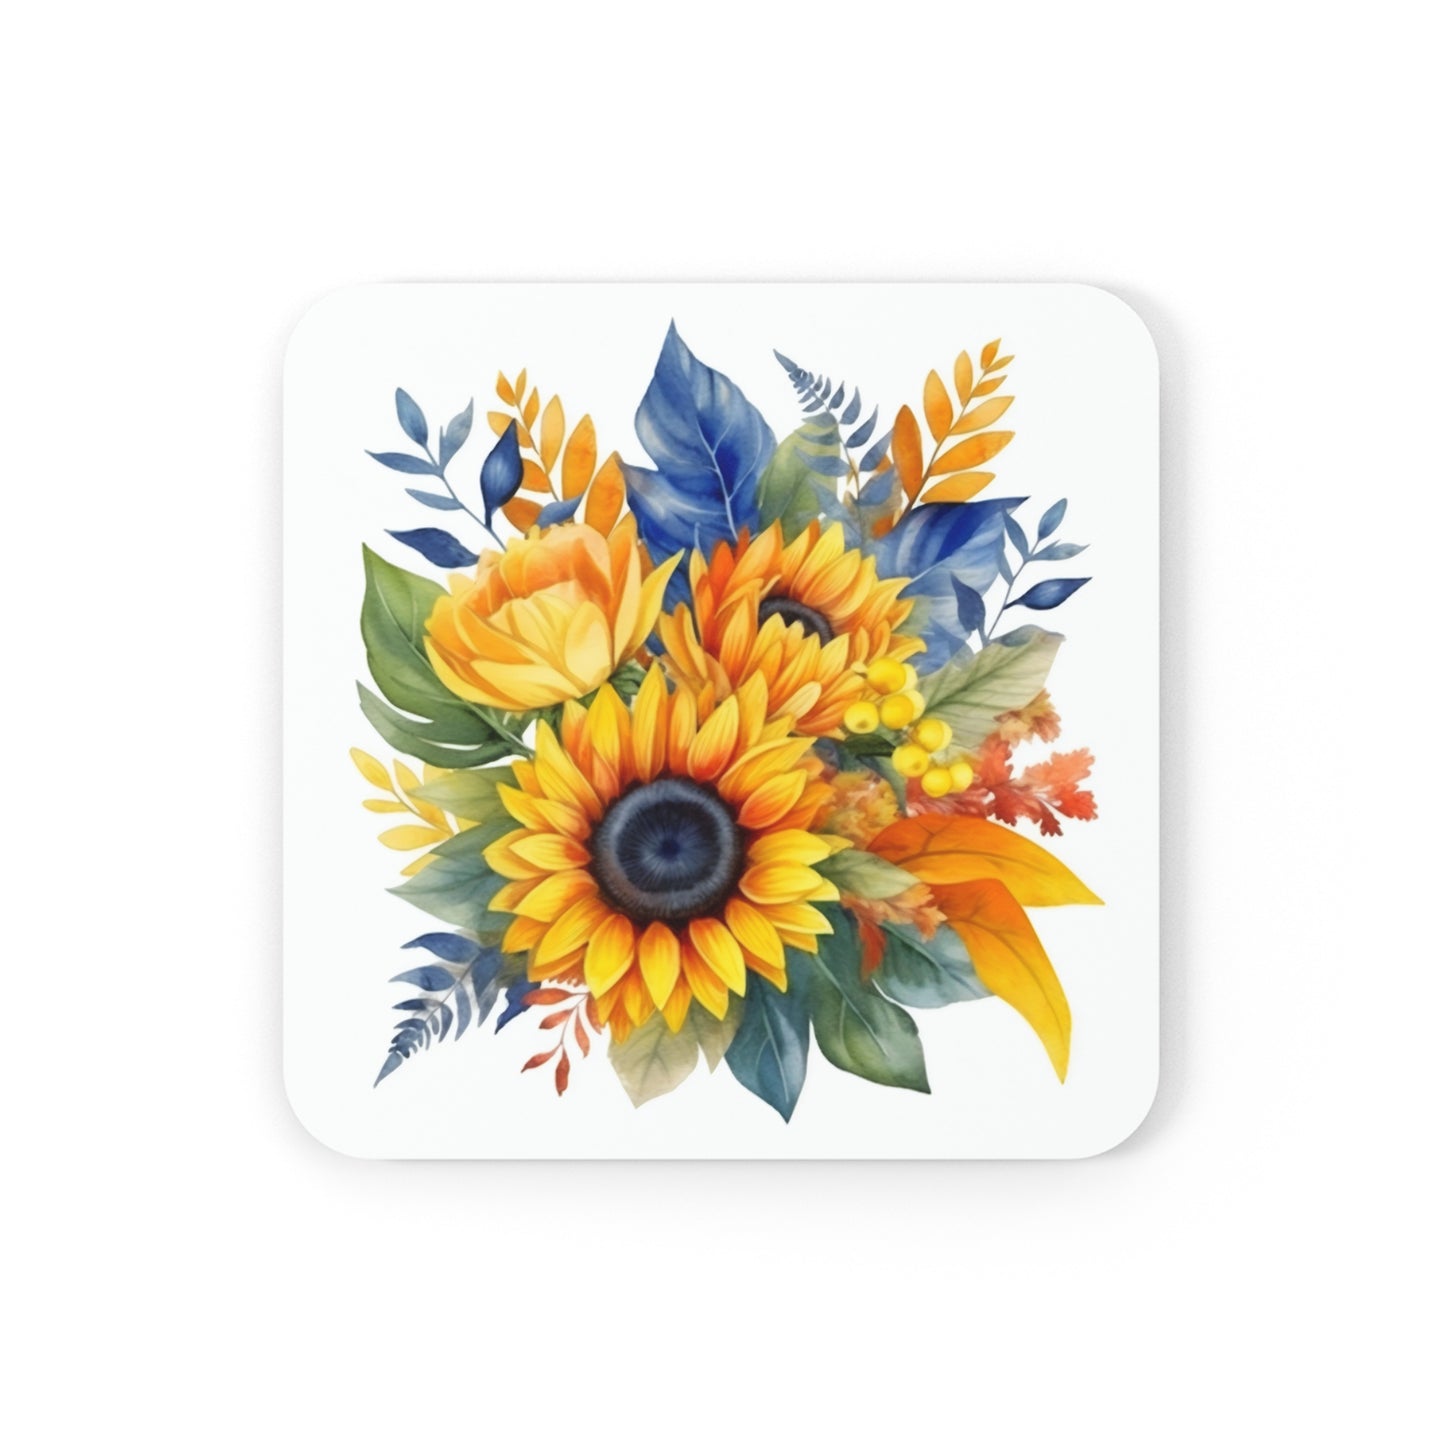 Sunflower Coaster Set of 4, Watercolor Sunflowers Coasters, Floral Square Drink Coasters, Nature Coasters, Cork Bottom, Housewarming Gift